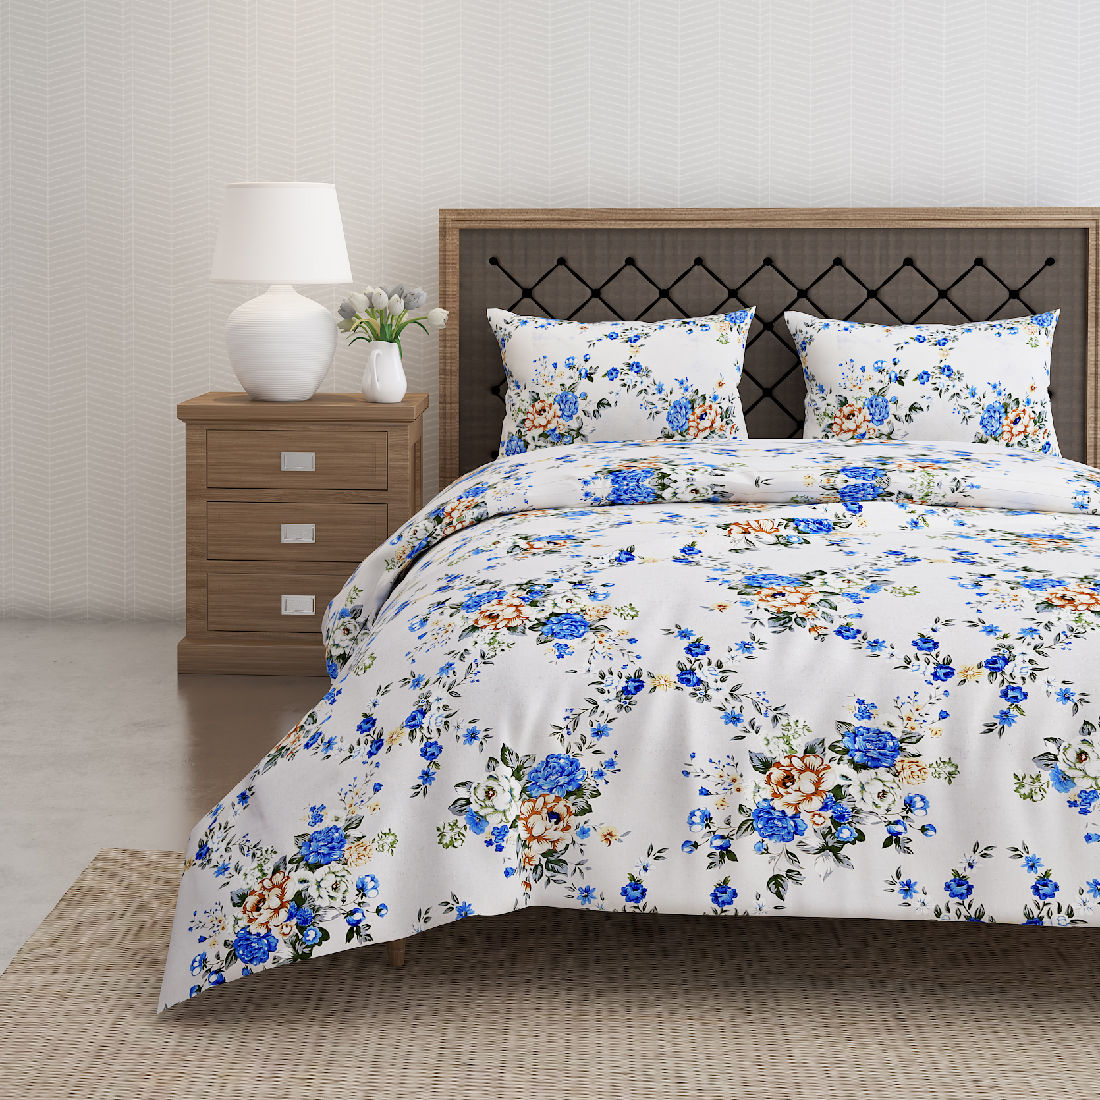 Swayam 144 Tc Pure Cotton White & Blue Floral Printed Bed Sheet 2 Matching Pillow Covers